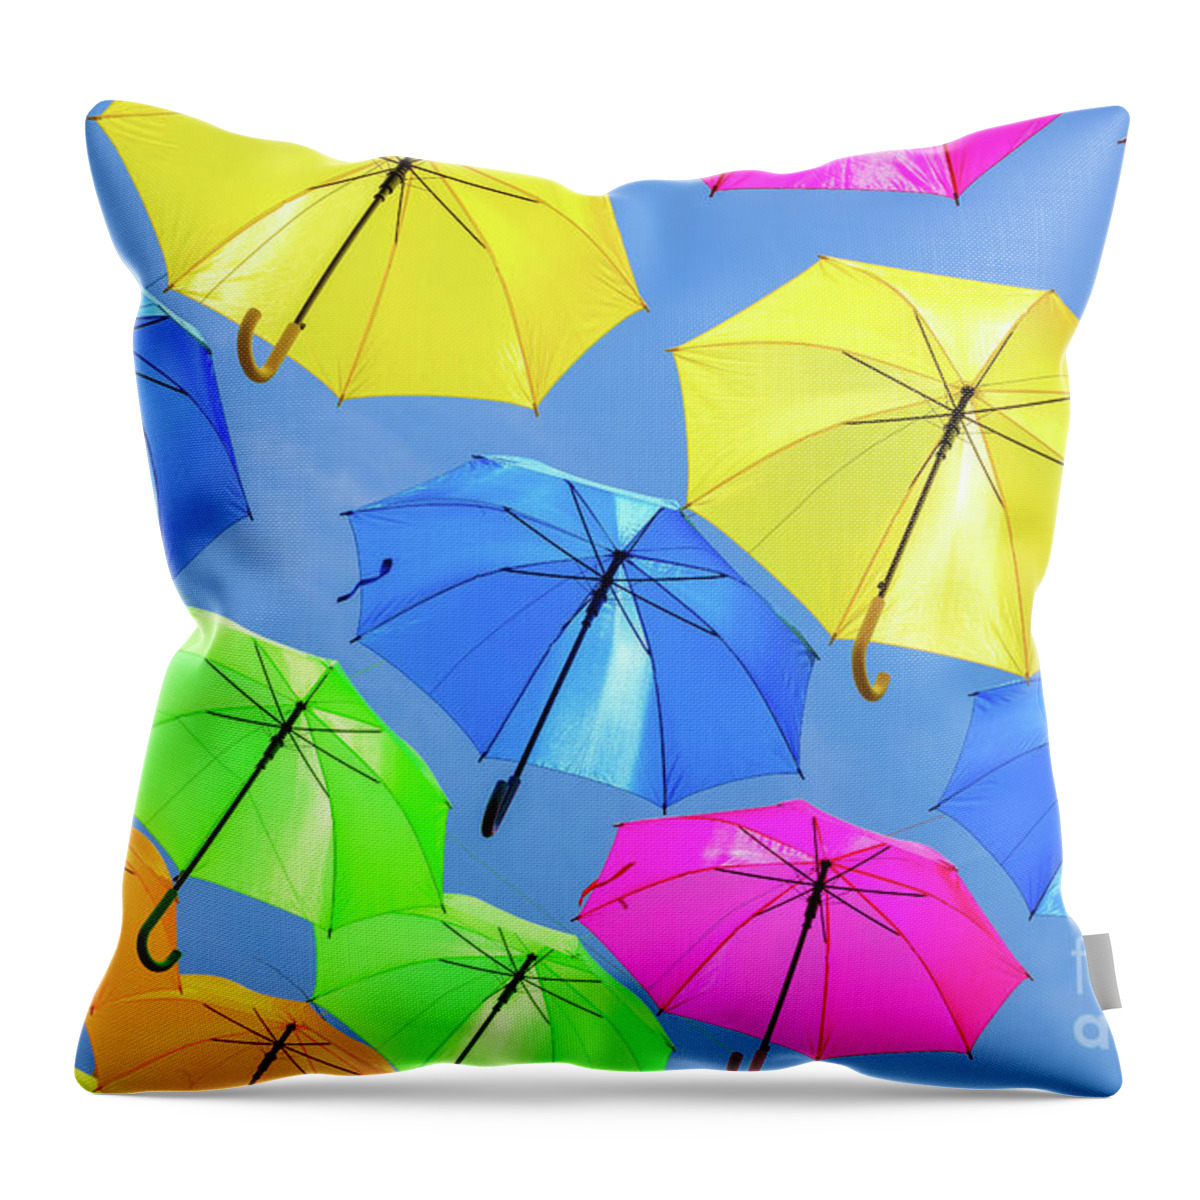 Umbrellas Throw Pillow featuring the photograph Colorful Umbrellas III by Raul Rodriguez